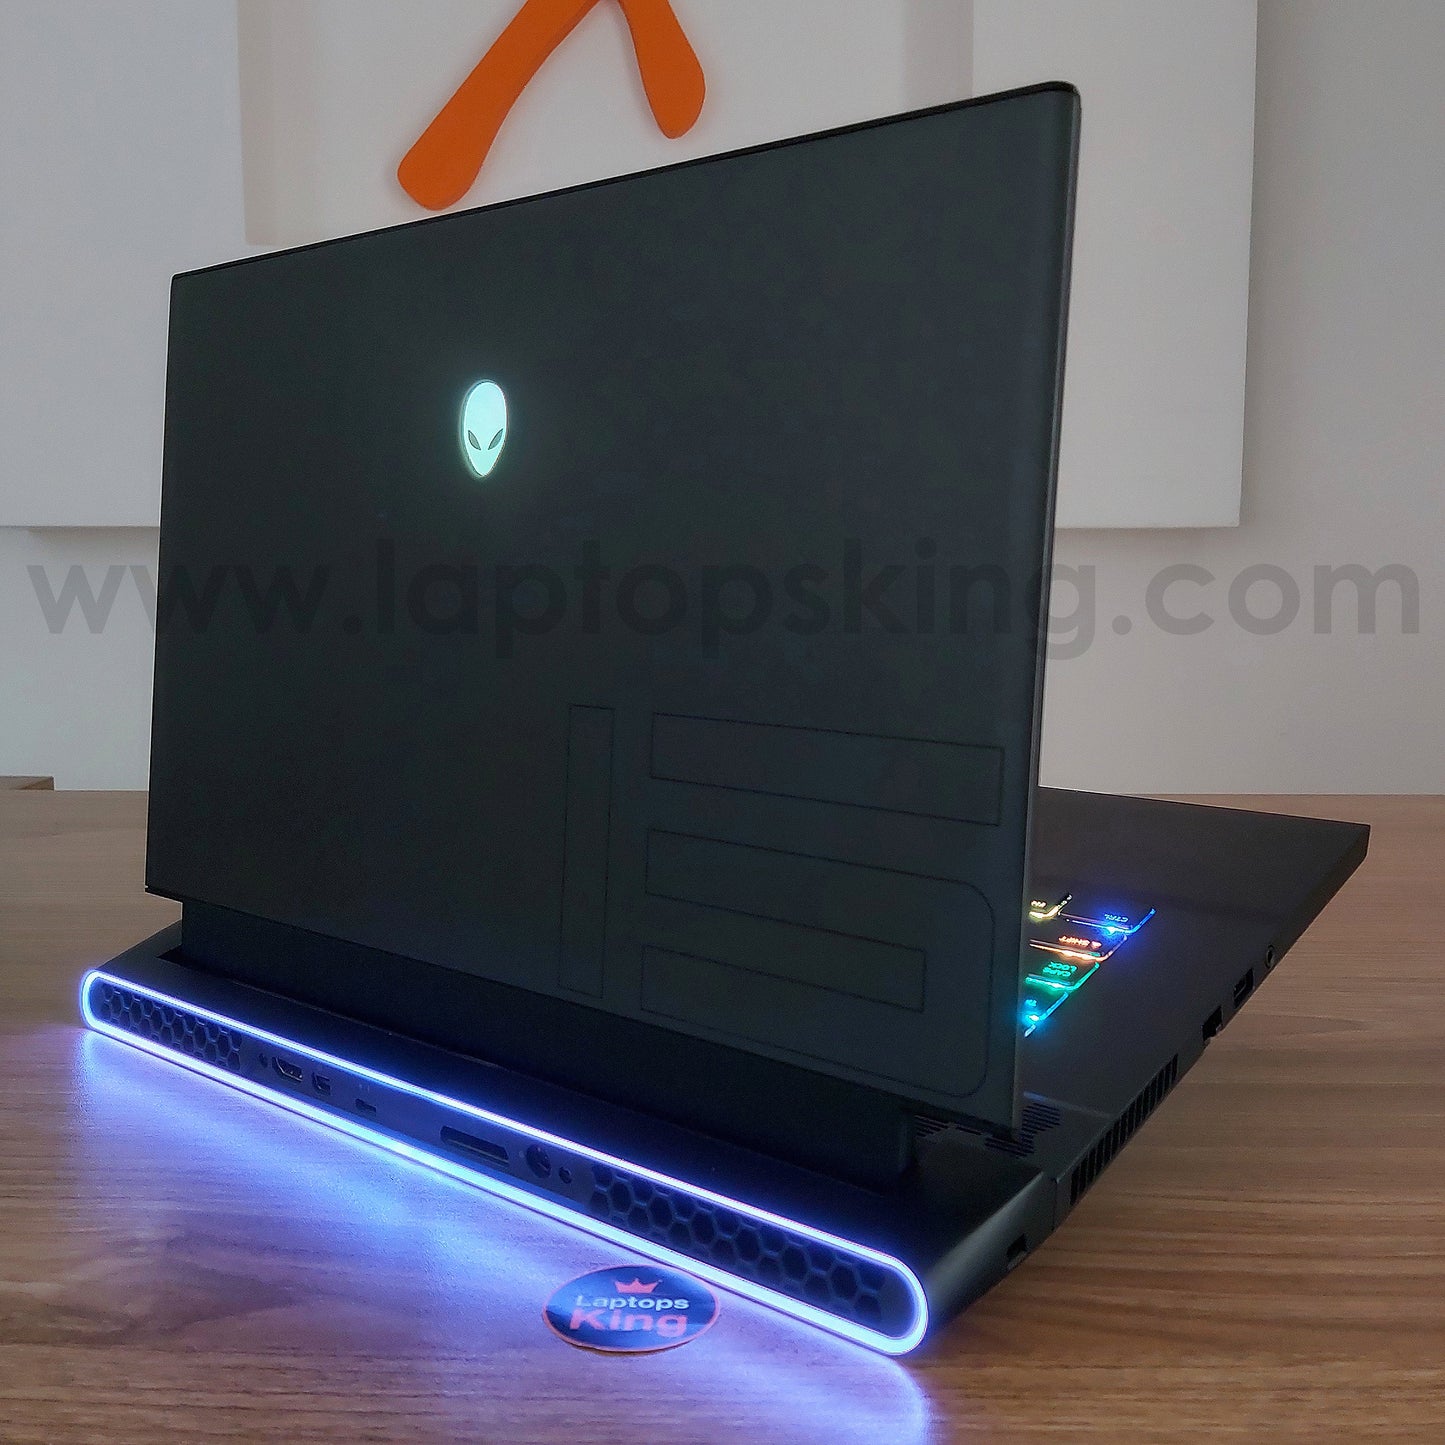 Alienware M15 R4 i7-10870h Rtx 3070 300hz Gaming Laptop (Open Box) Gaming laptop, Graphic Design laptop, best laptop for gaming, best laptop for graphic design, computer for sale Lebanon, laptop for video editing in Lebanon, laptop for sale Lebanon, best graphic design laptop,	best video editing laptop, best programming laptop, laptop for sale in Lebanon, laptops for sale in Lebanon, laptop for sale in Lebanon, buy computer Lebanon, buy laptop Lebanon.